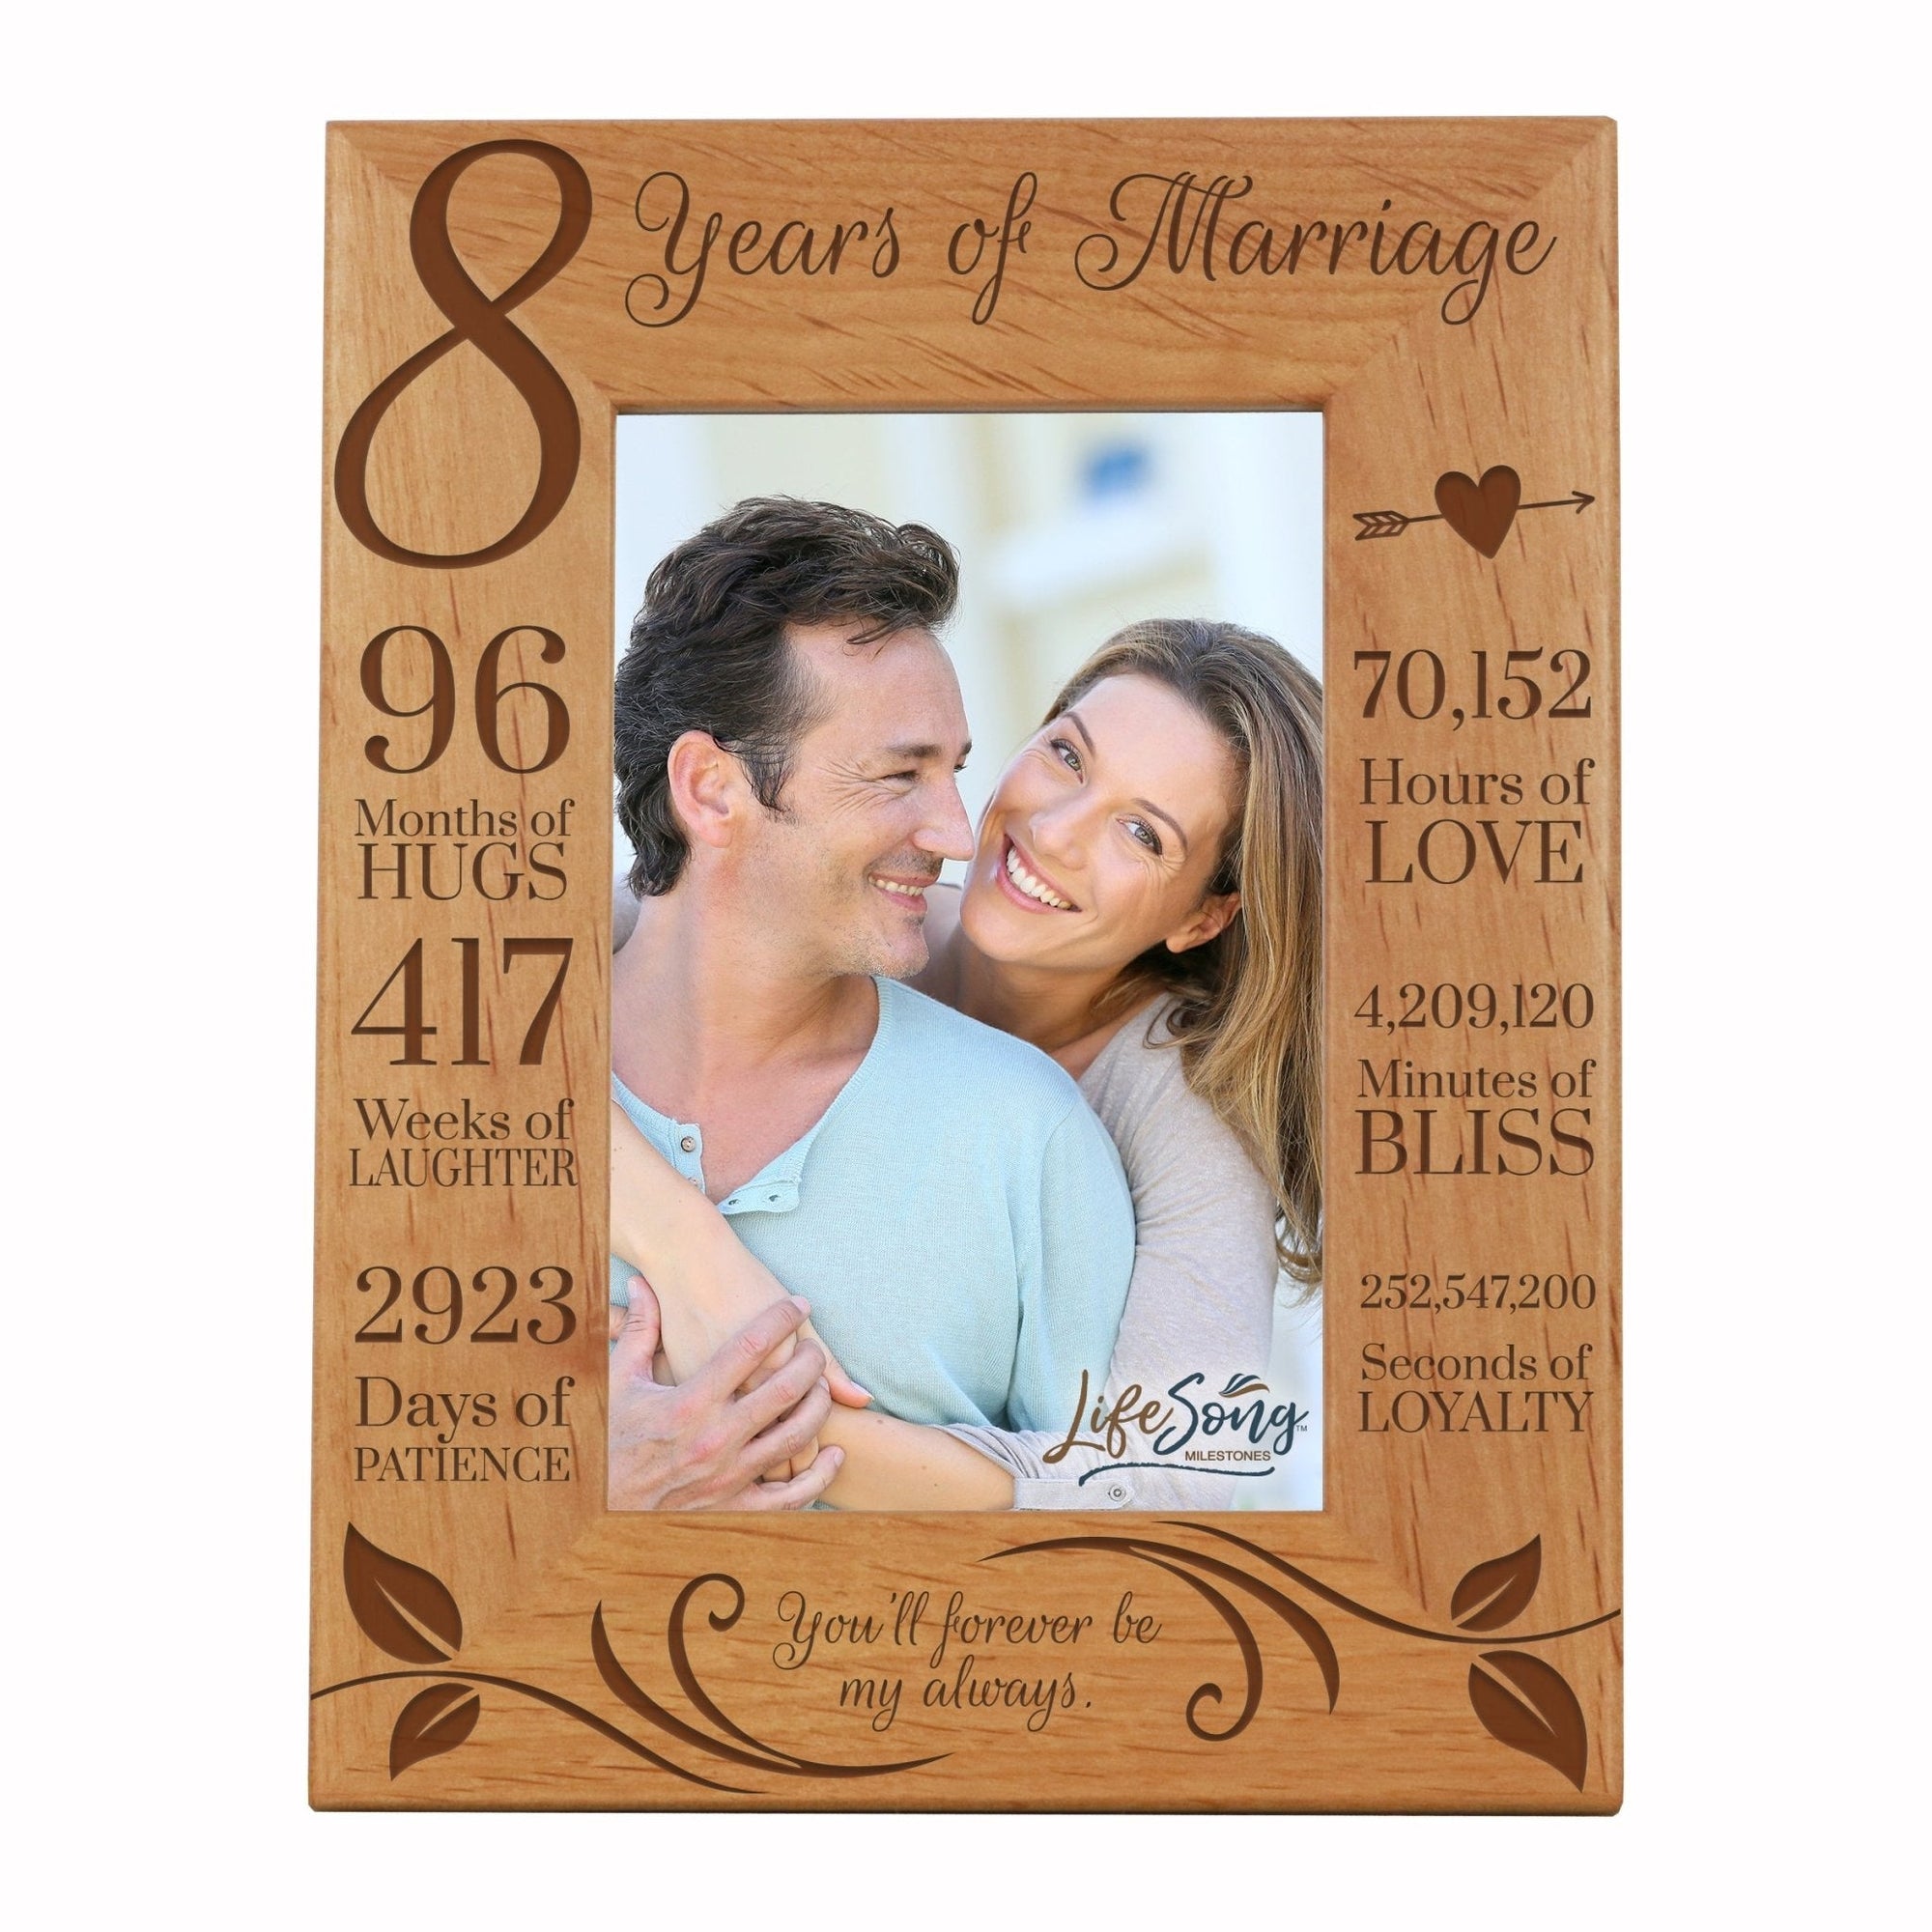 Engraved 8th Wedding Anniversary Photo Frame Wall Decor Gift for Couples - Forever Be My Always - LifeSong Milestones